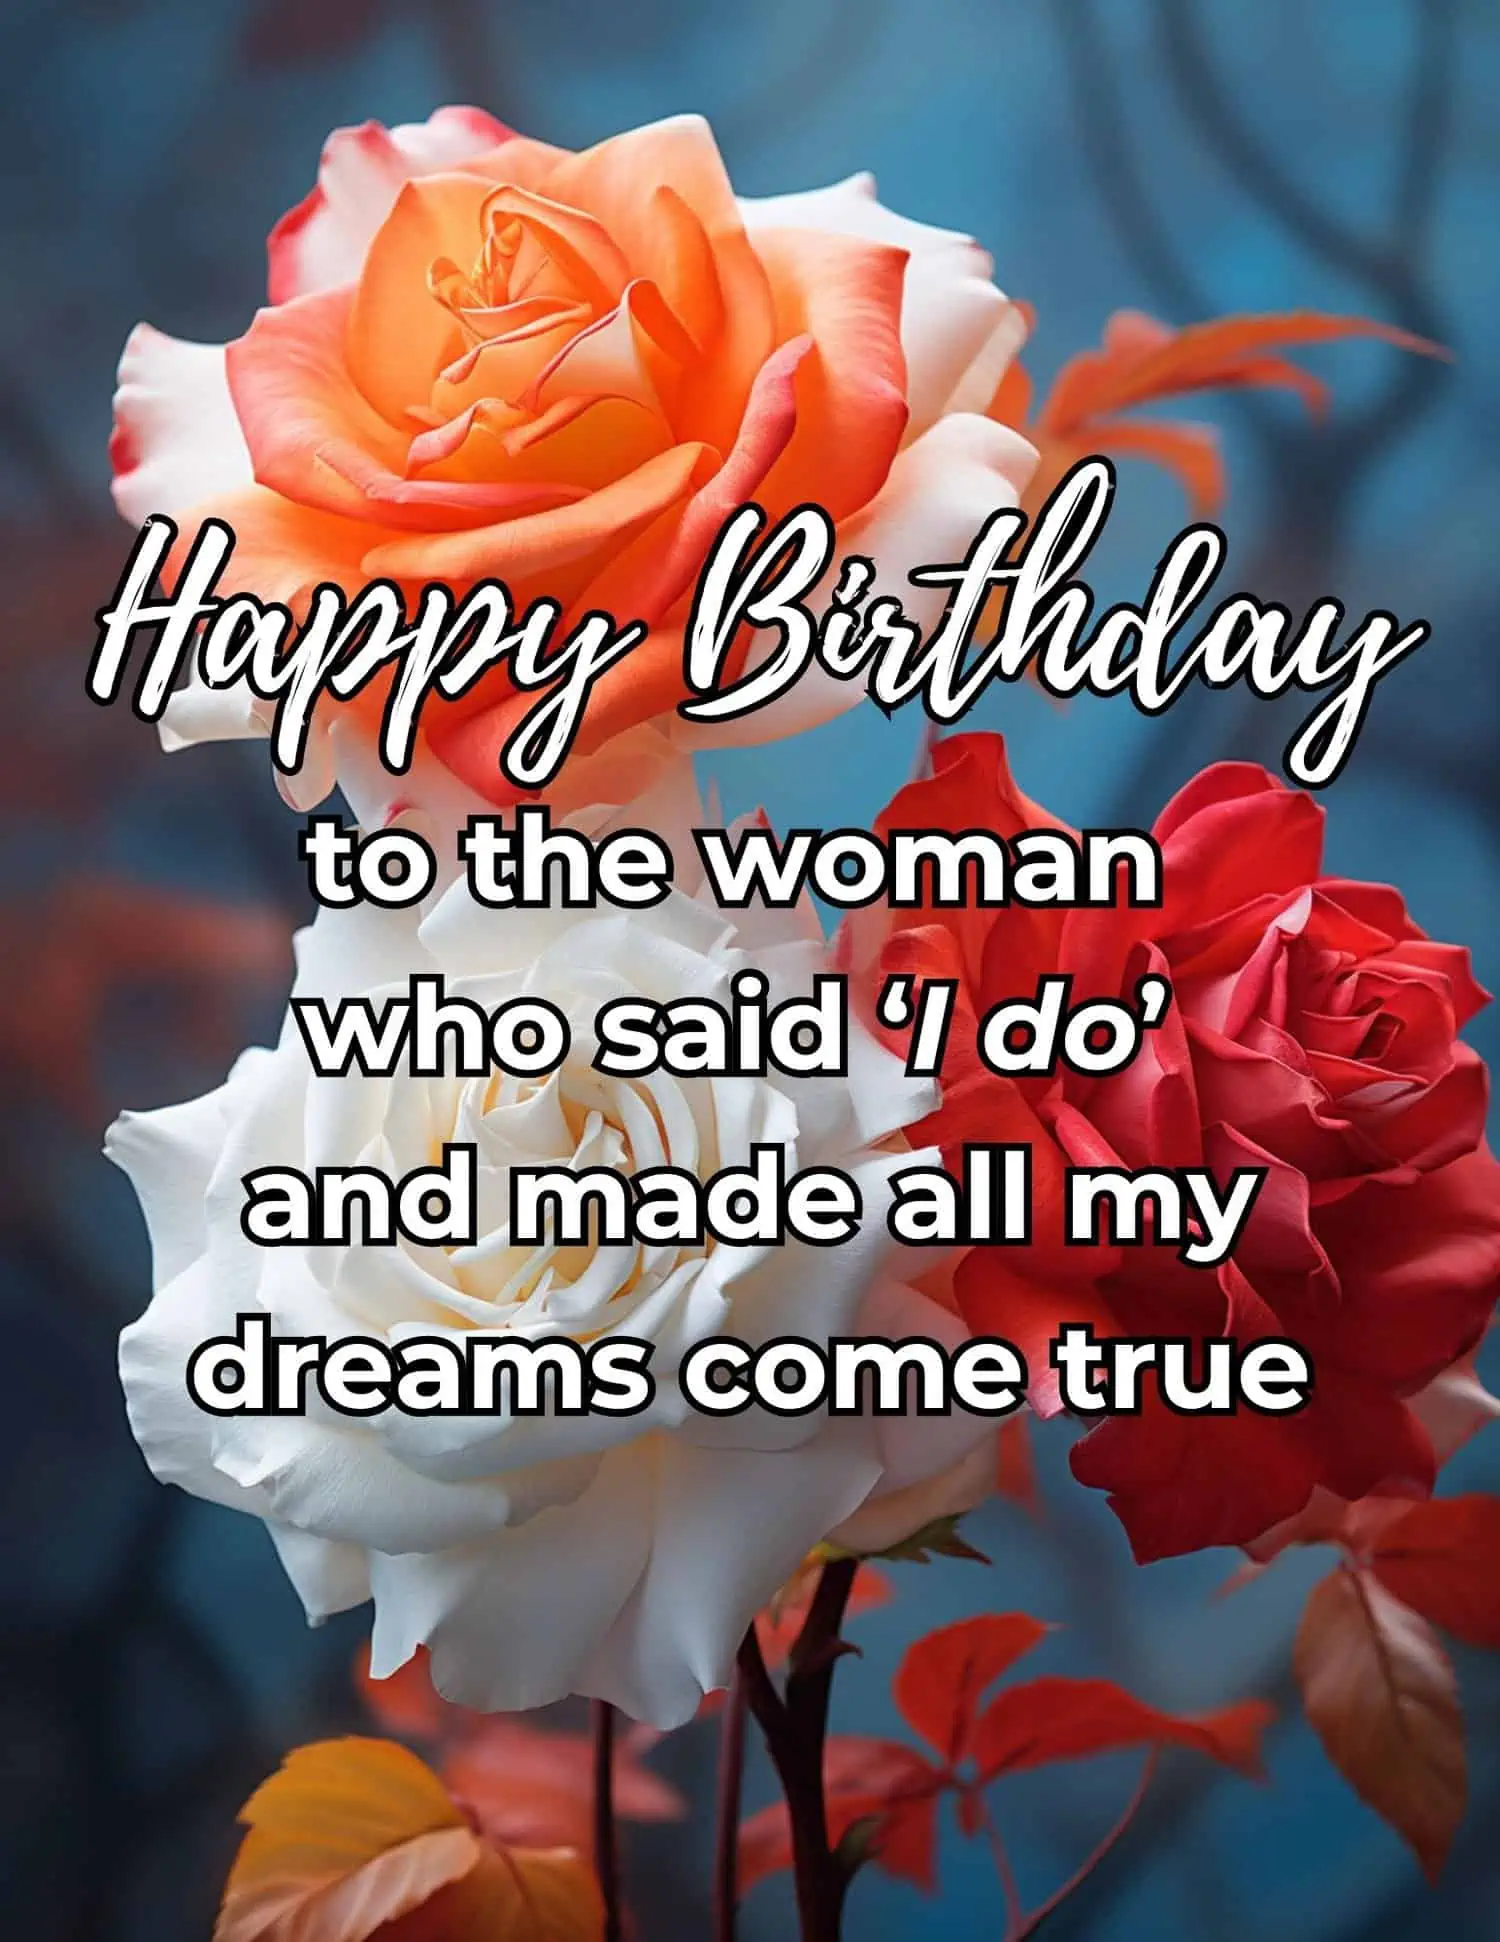 Express deep affection and love for your wife on her birthday with these heartfelt messages.